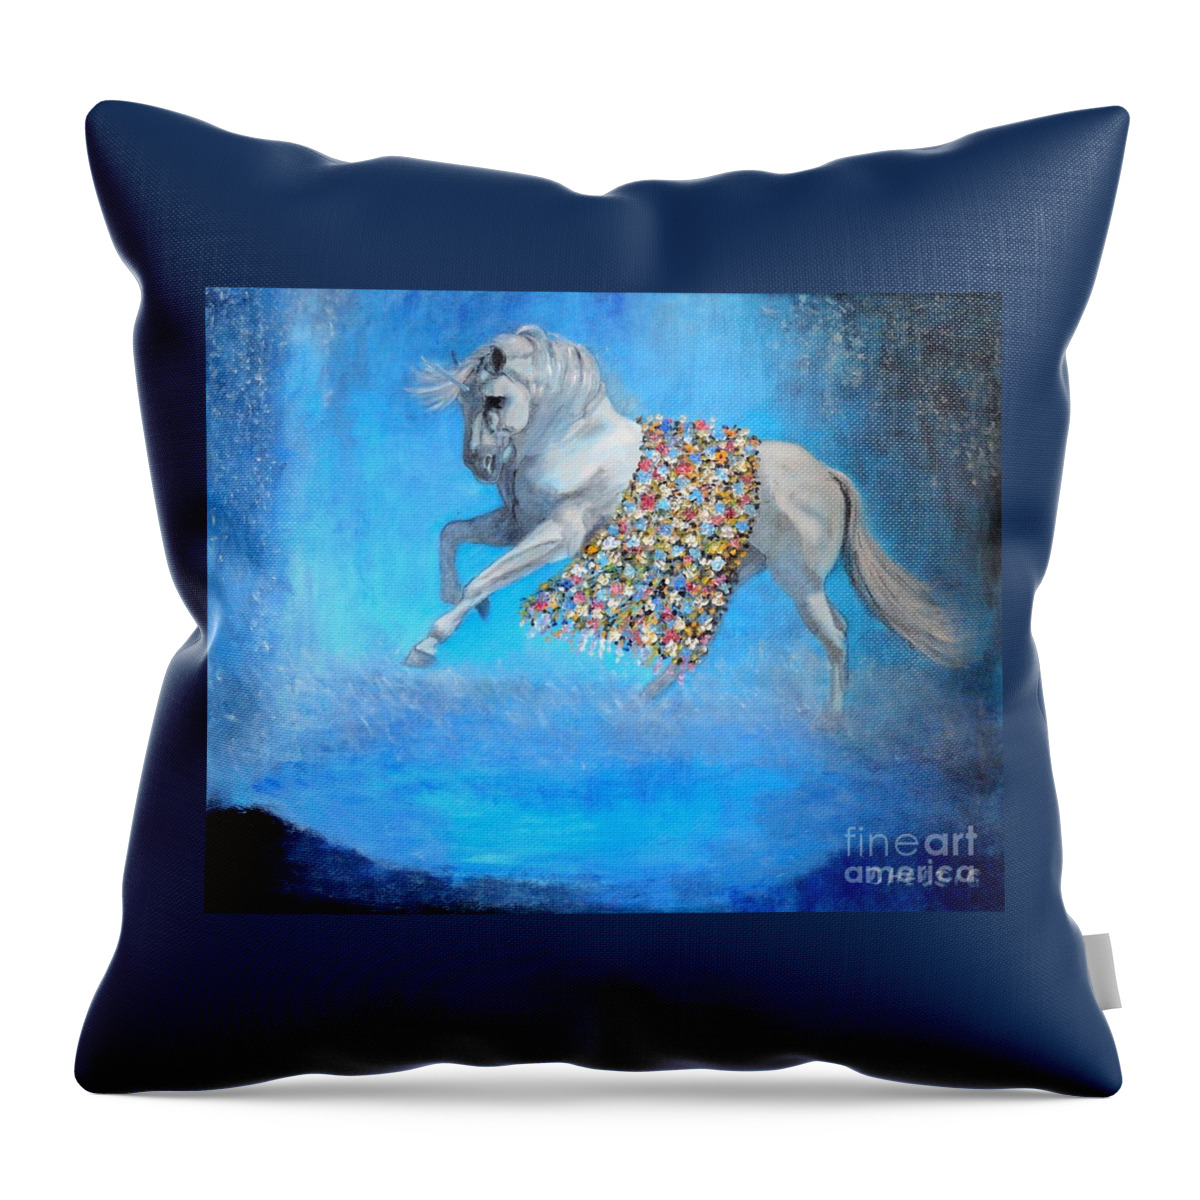 The Legendary Unicorn - Ferry-tale Throw Pillow featuring the painting The Unicorn by Dagmar Helbig